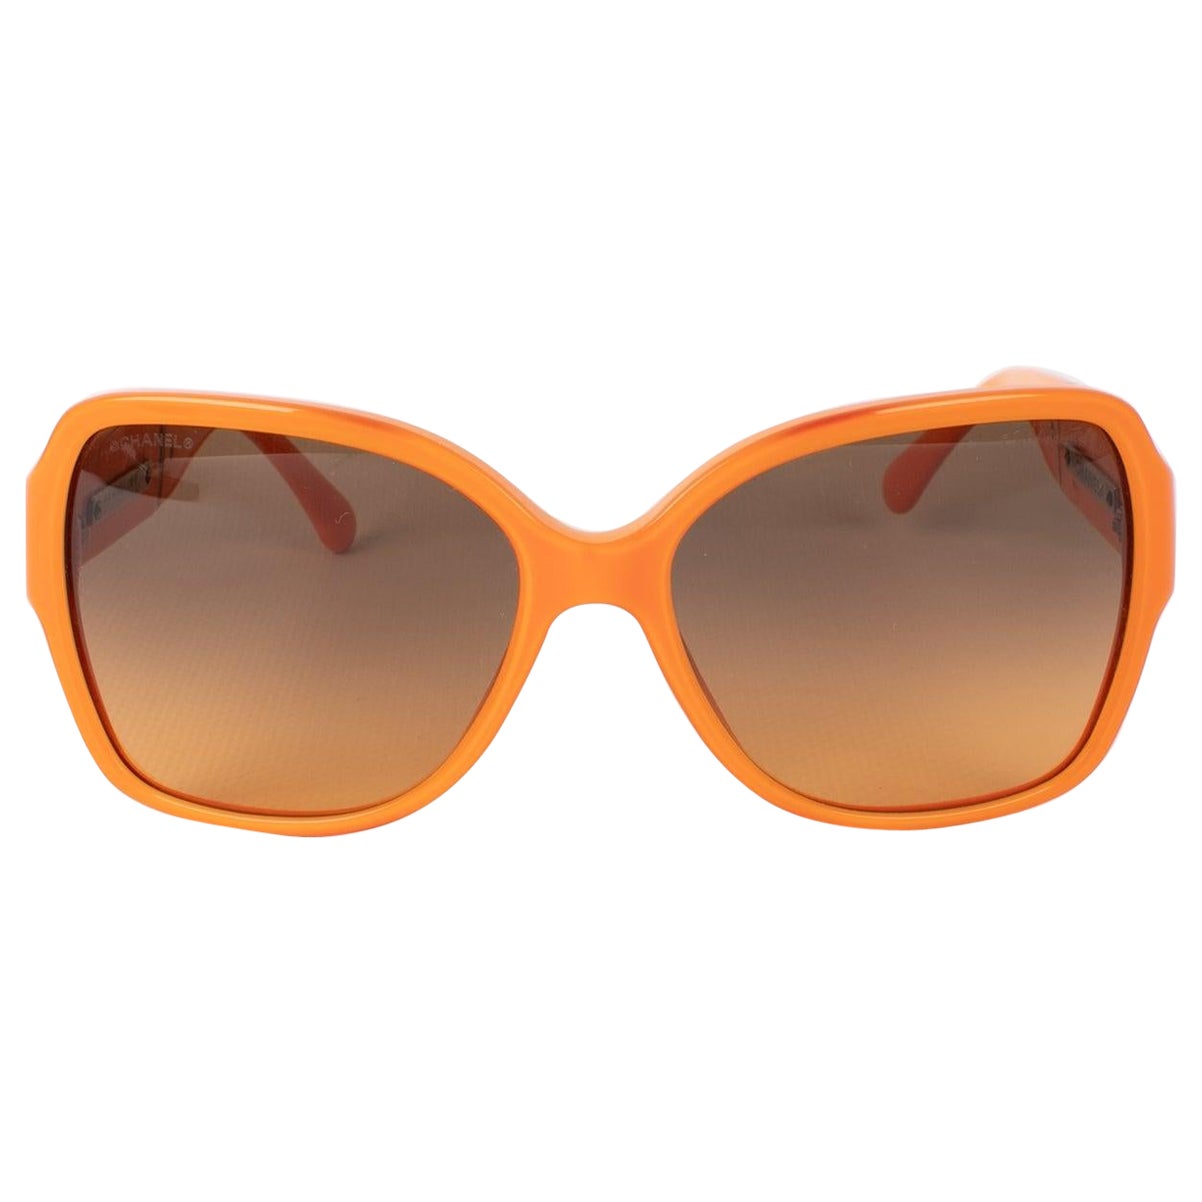 Chanel Orange Sunglasses with CC Logos For Sale